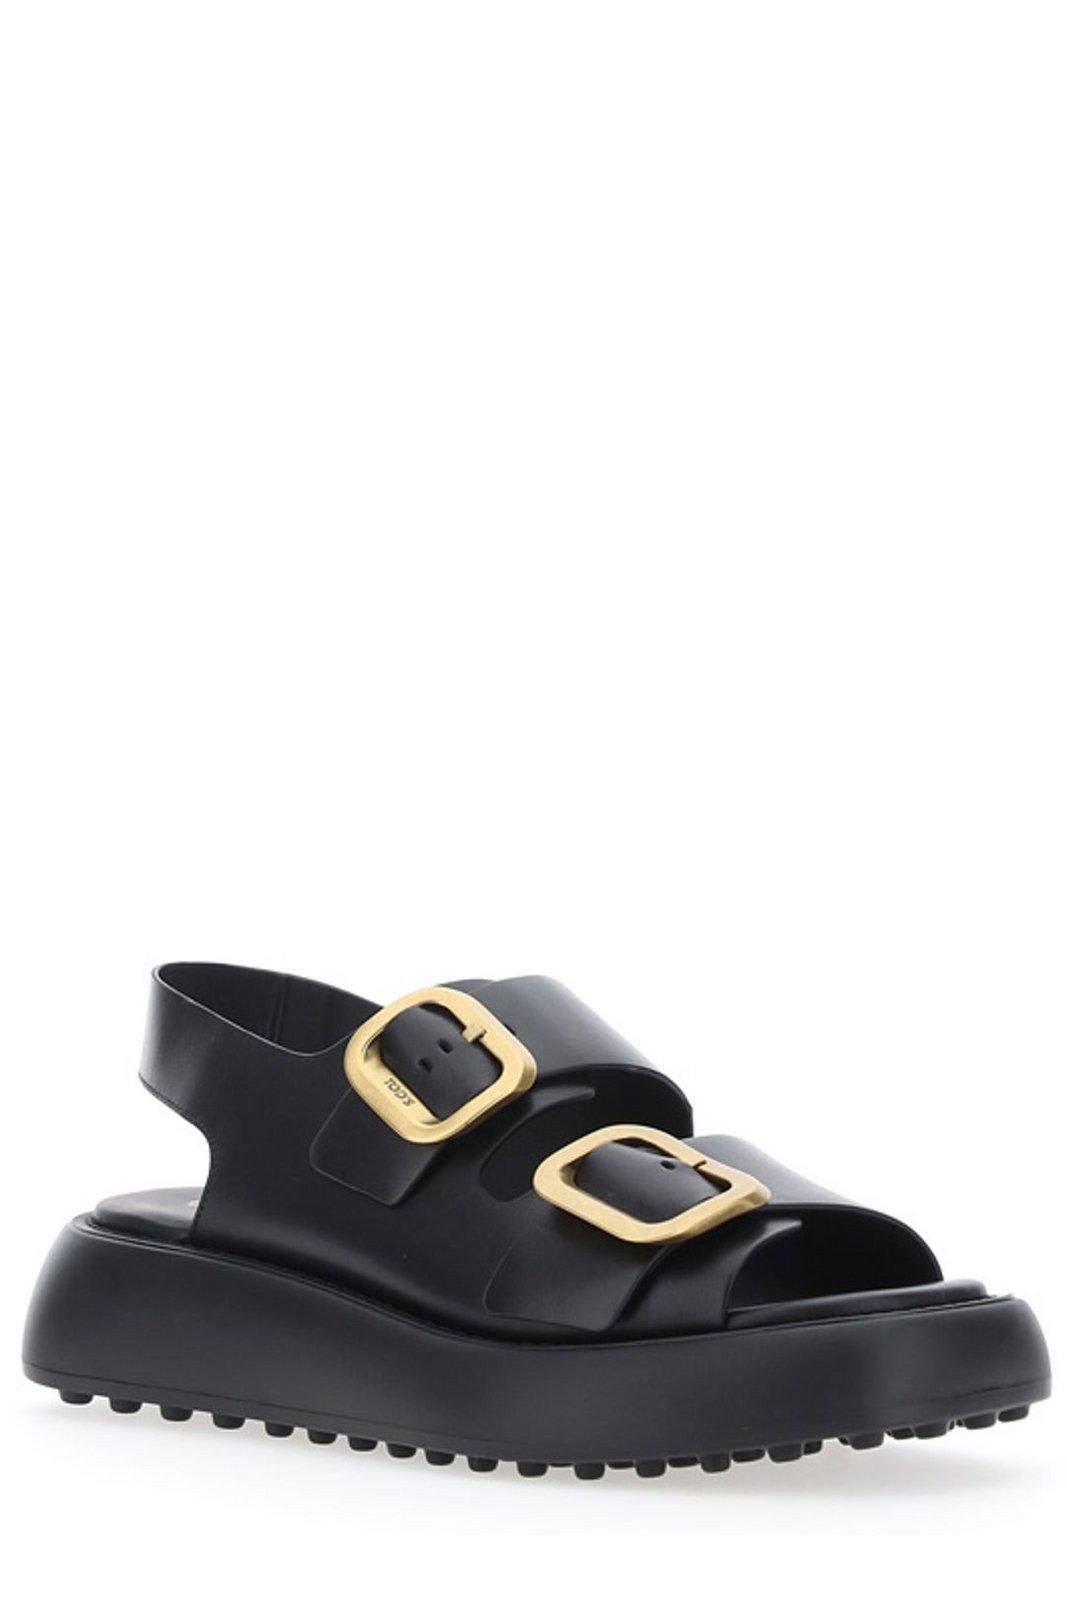 TOD'S DOUBLE BUCKLE STRAP SANDALS